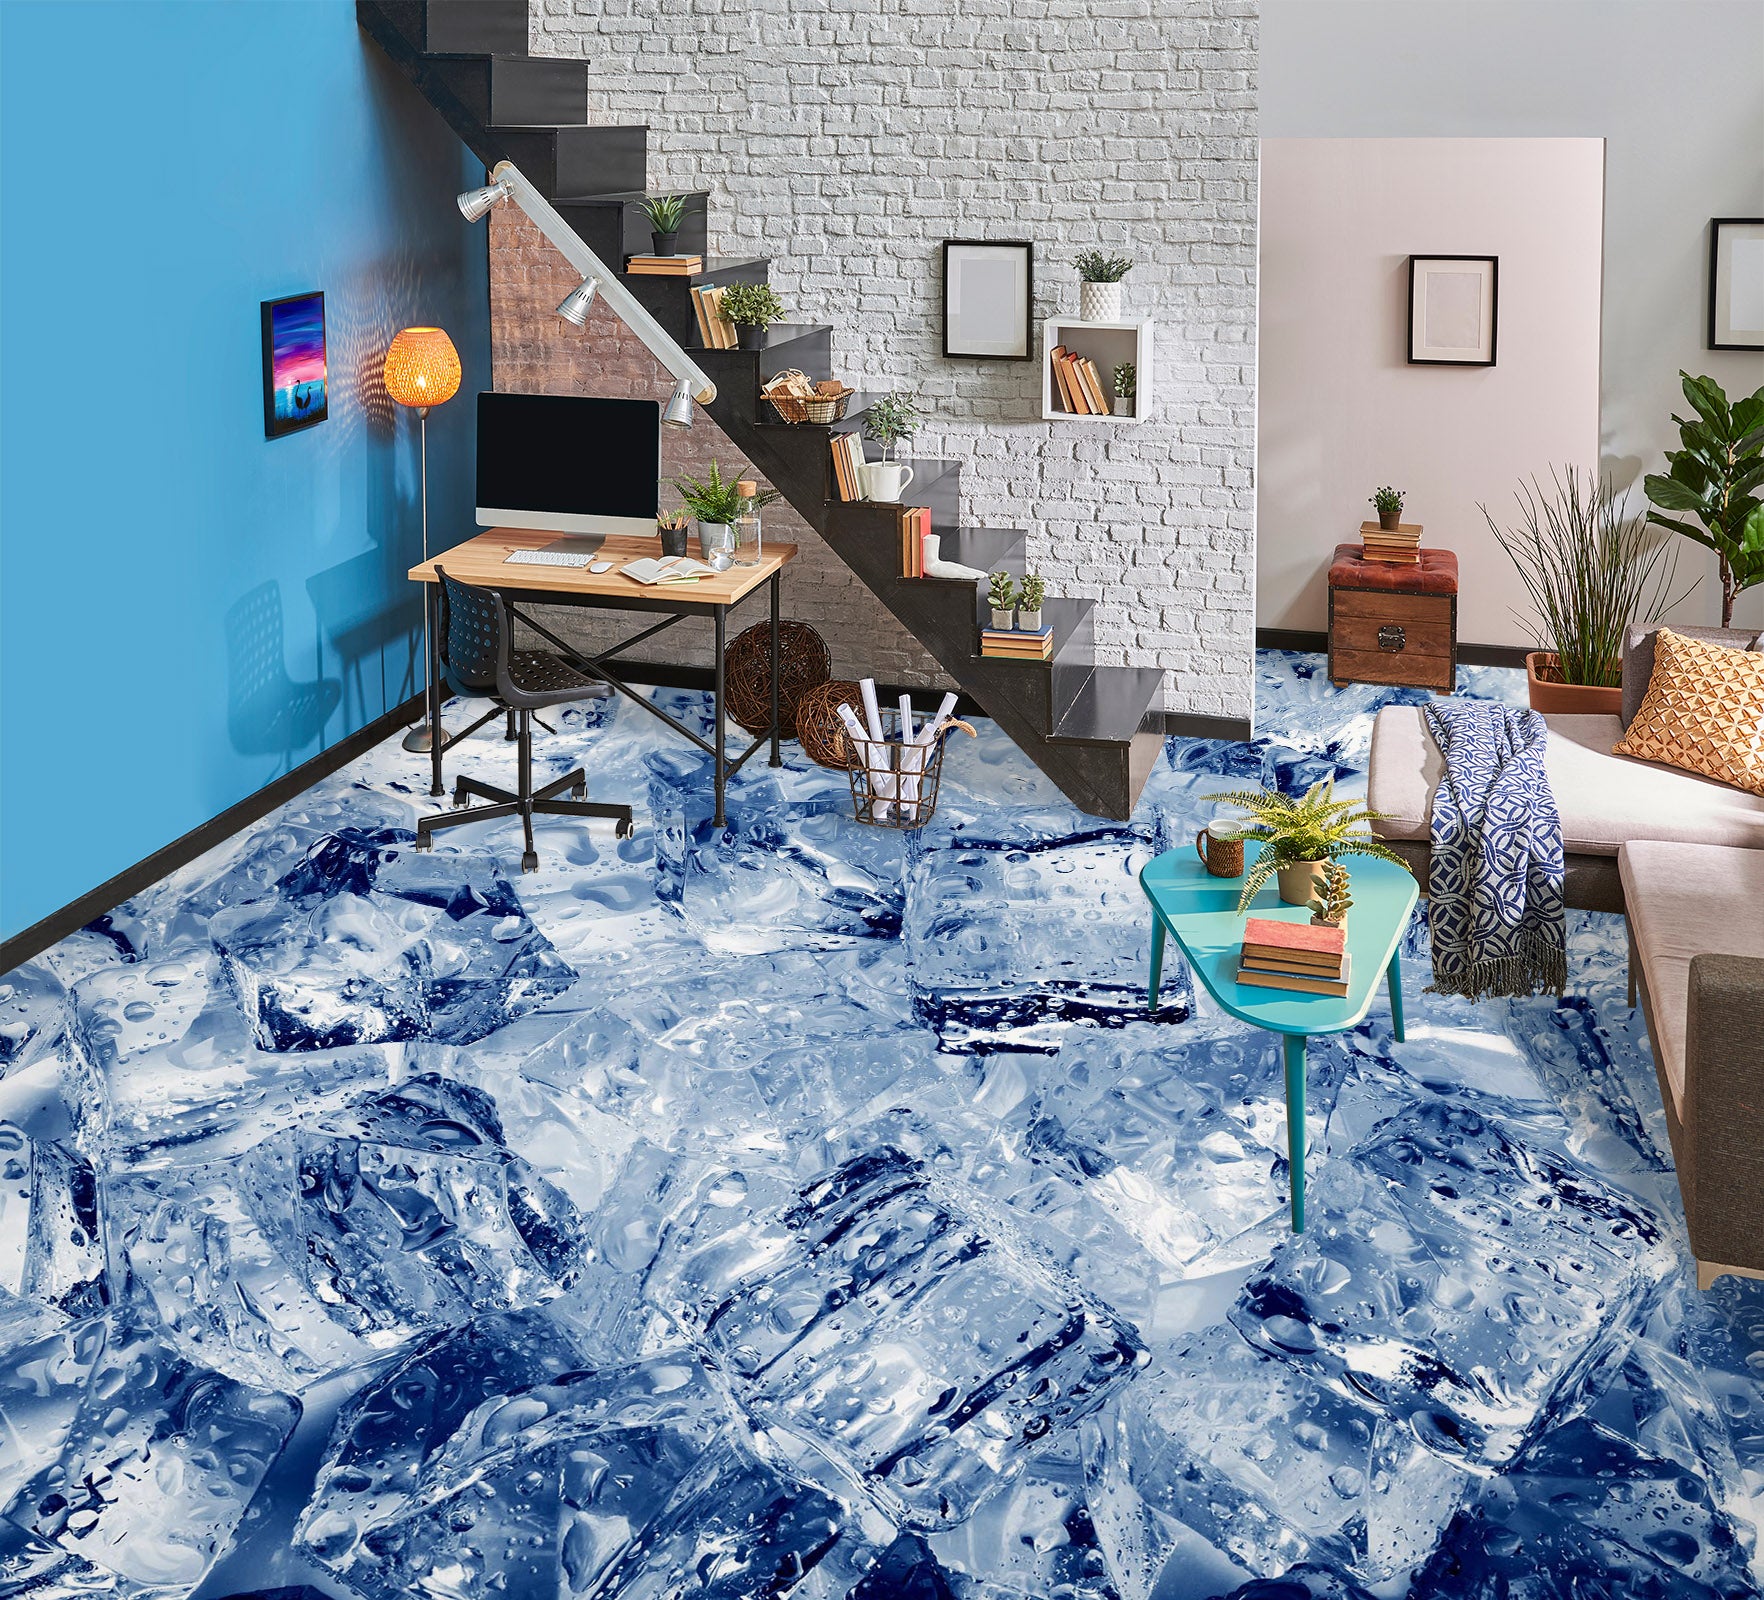 3D Artistic Ice Cubes 1414 Floor Mural  Wallpaper Murals Self-Adhesive Removable Print Epoxy